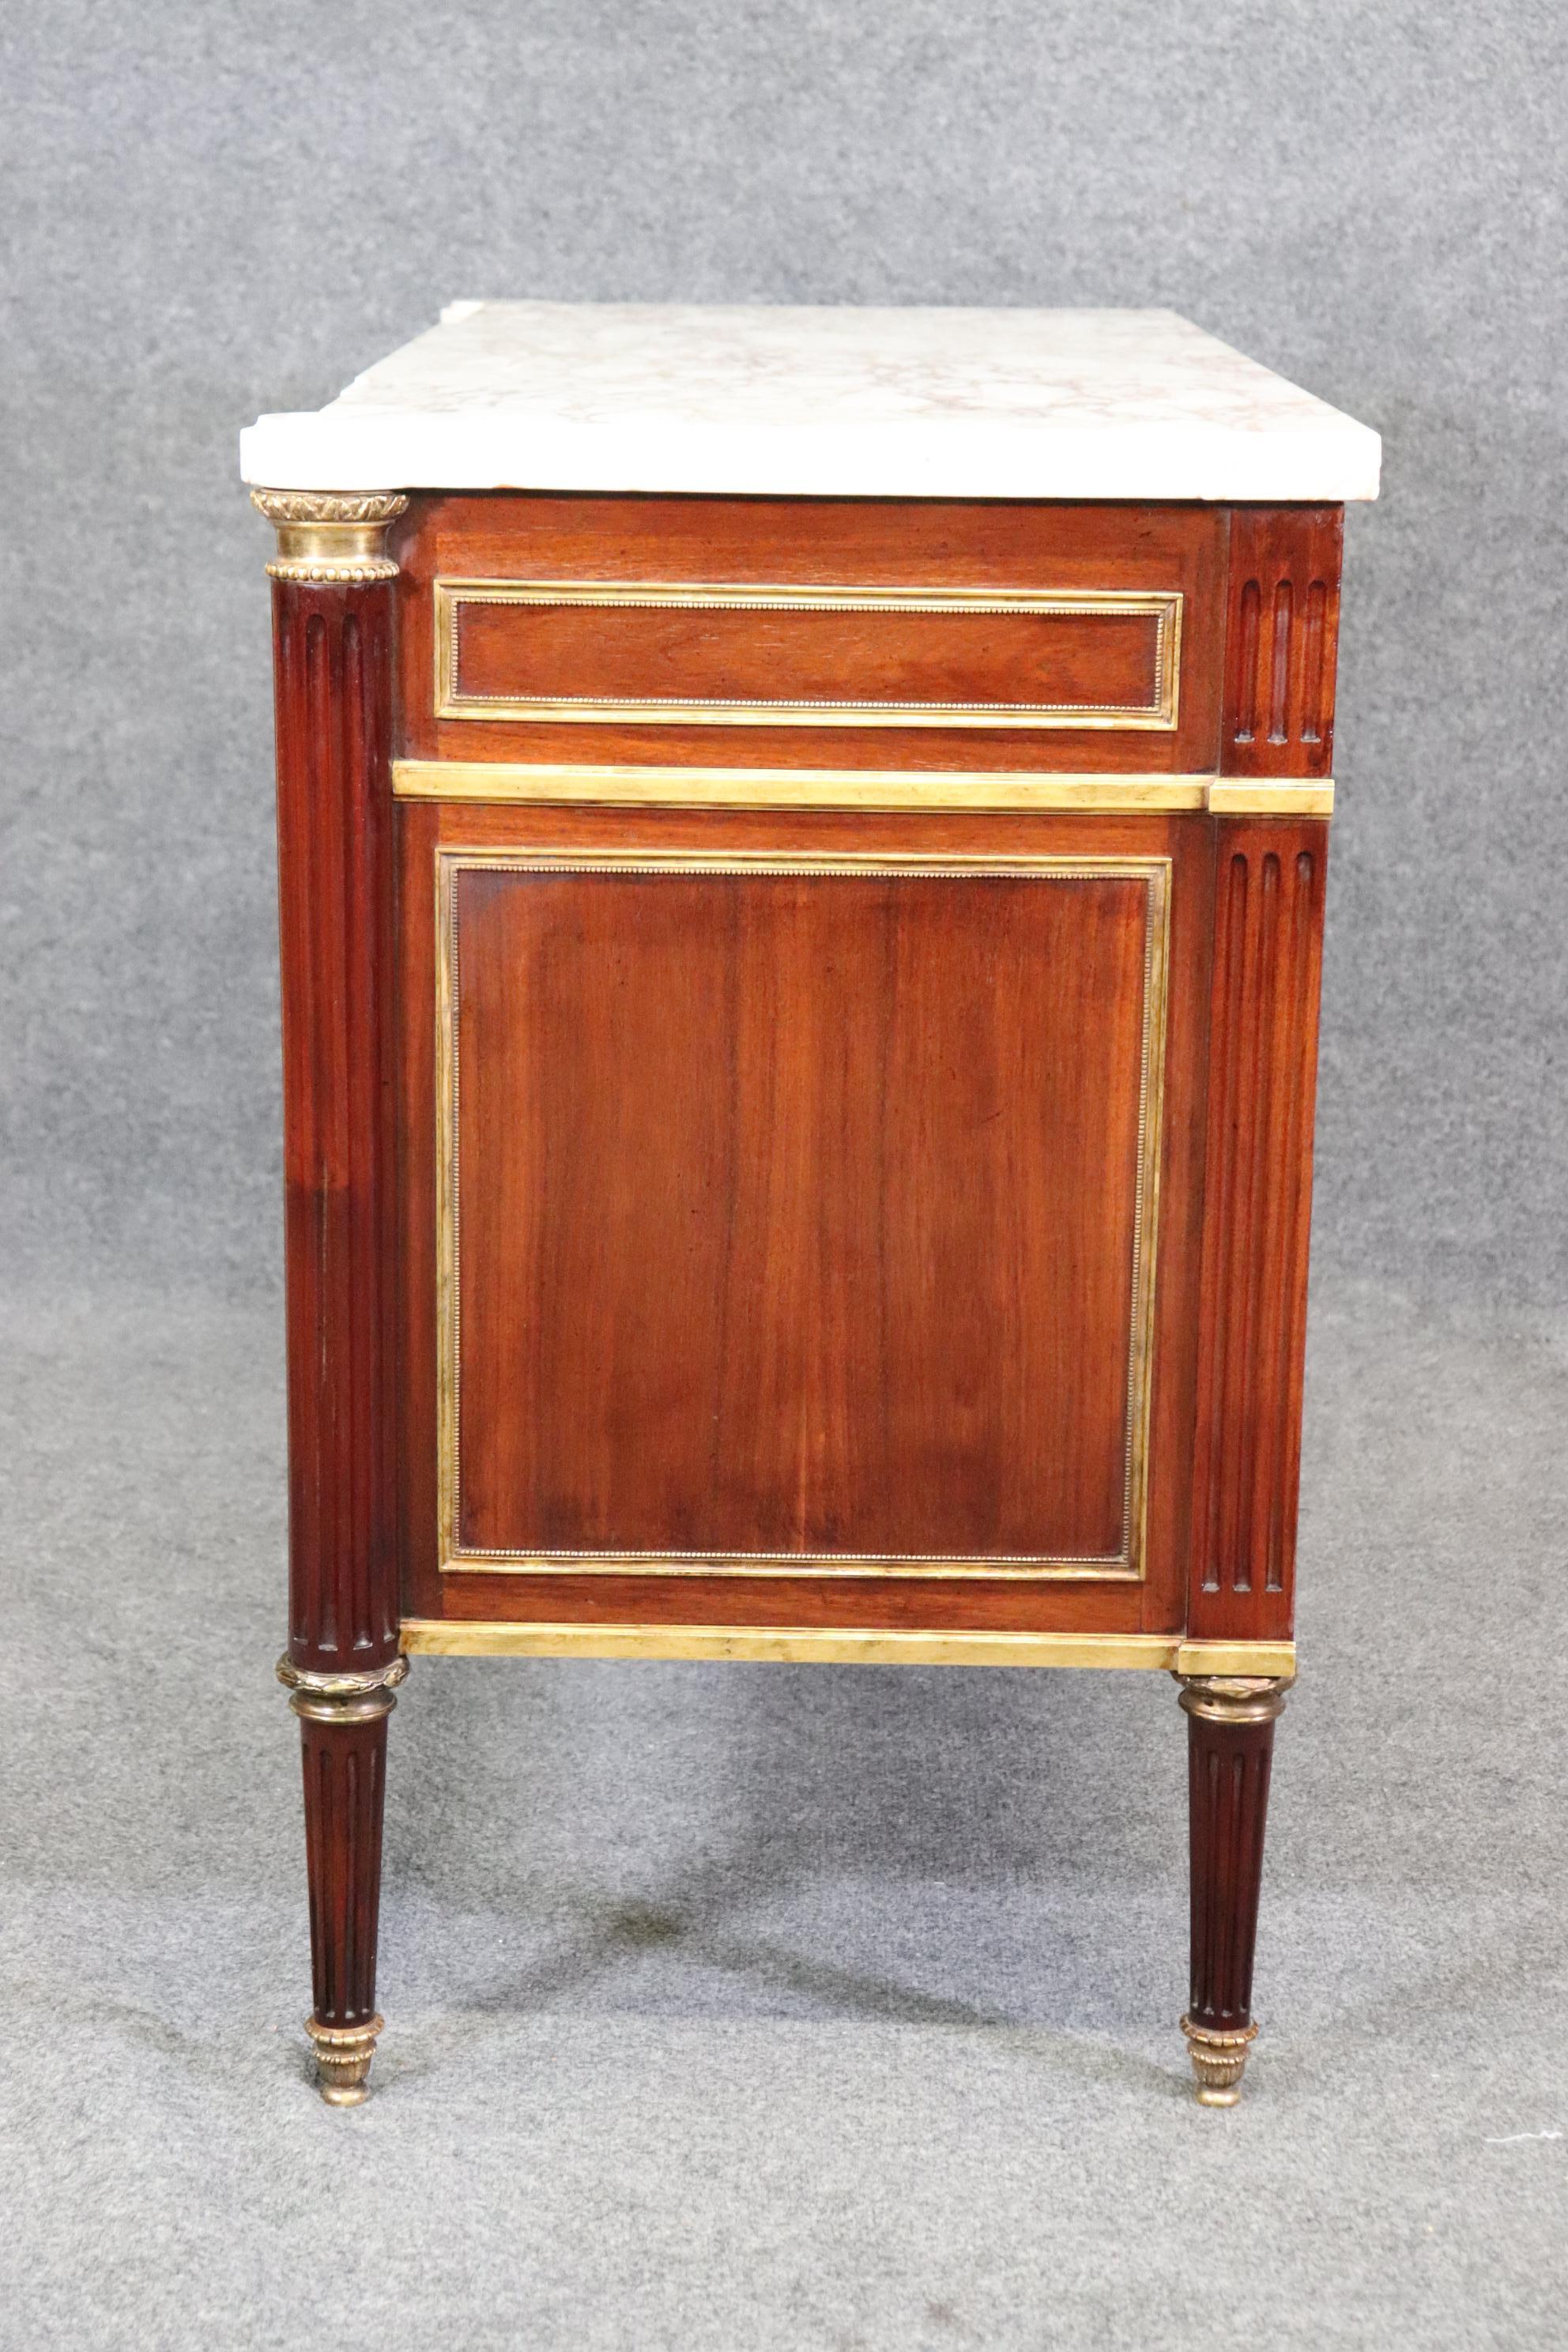 Fine Quality 19th Century Bronze Mounted Directoire Jansen Style Marble Commode For Sale 2